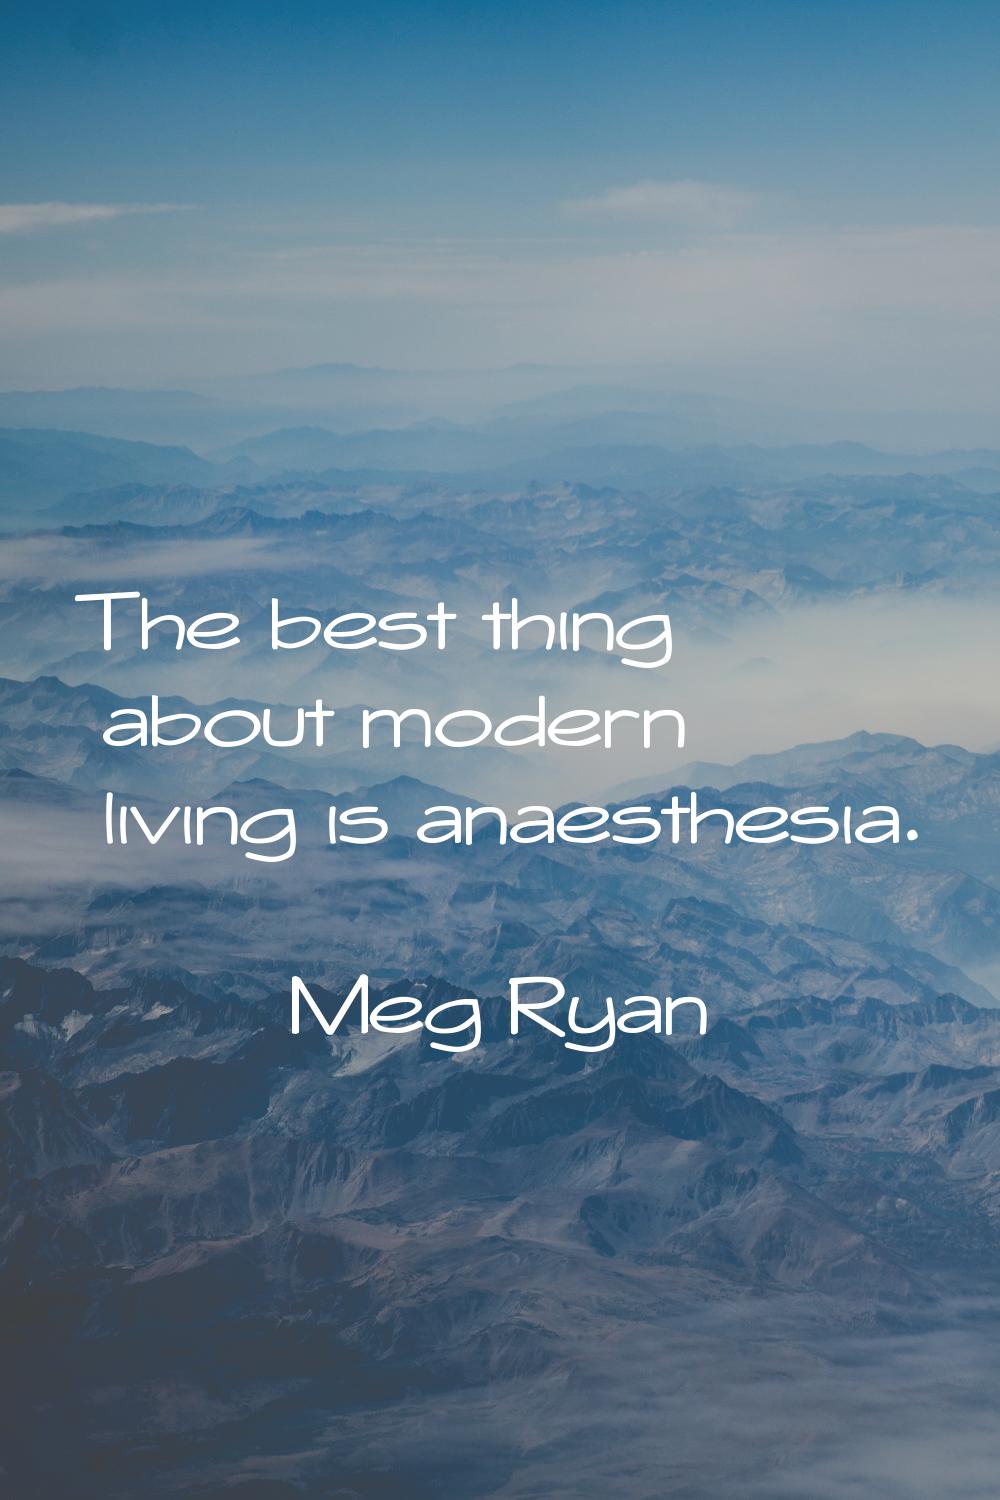 The best thing about modern living is anaesthesia.